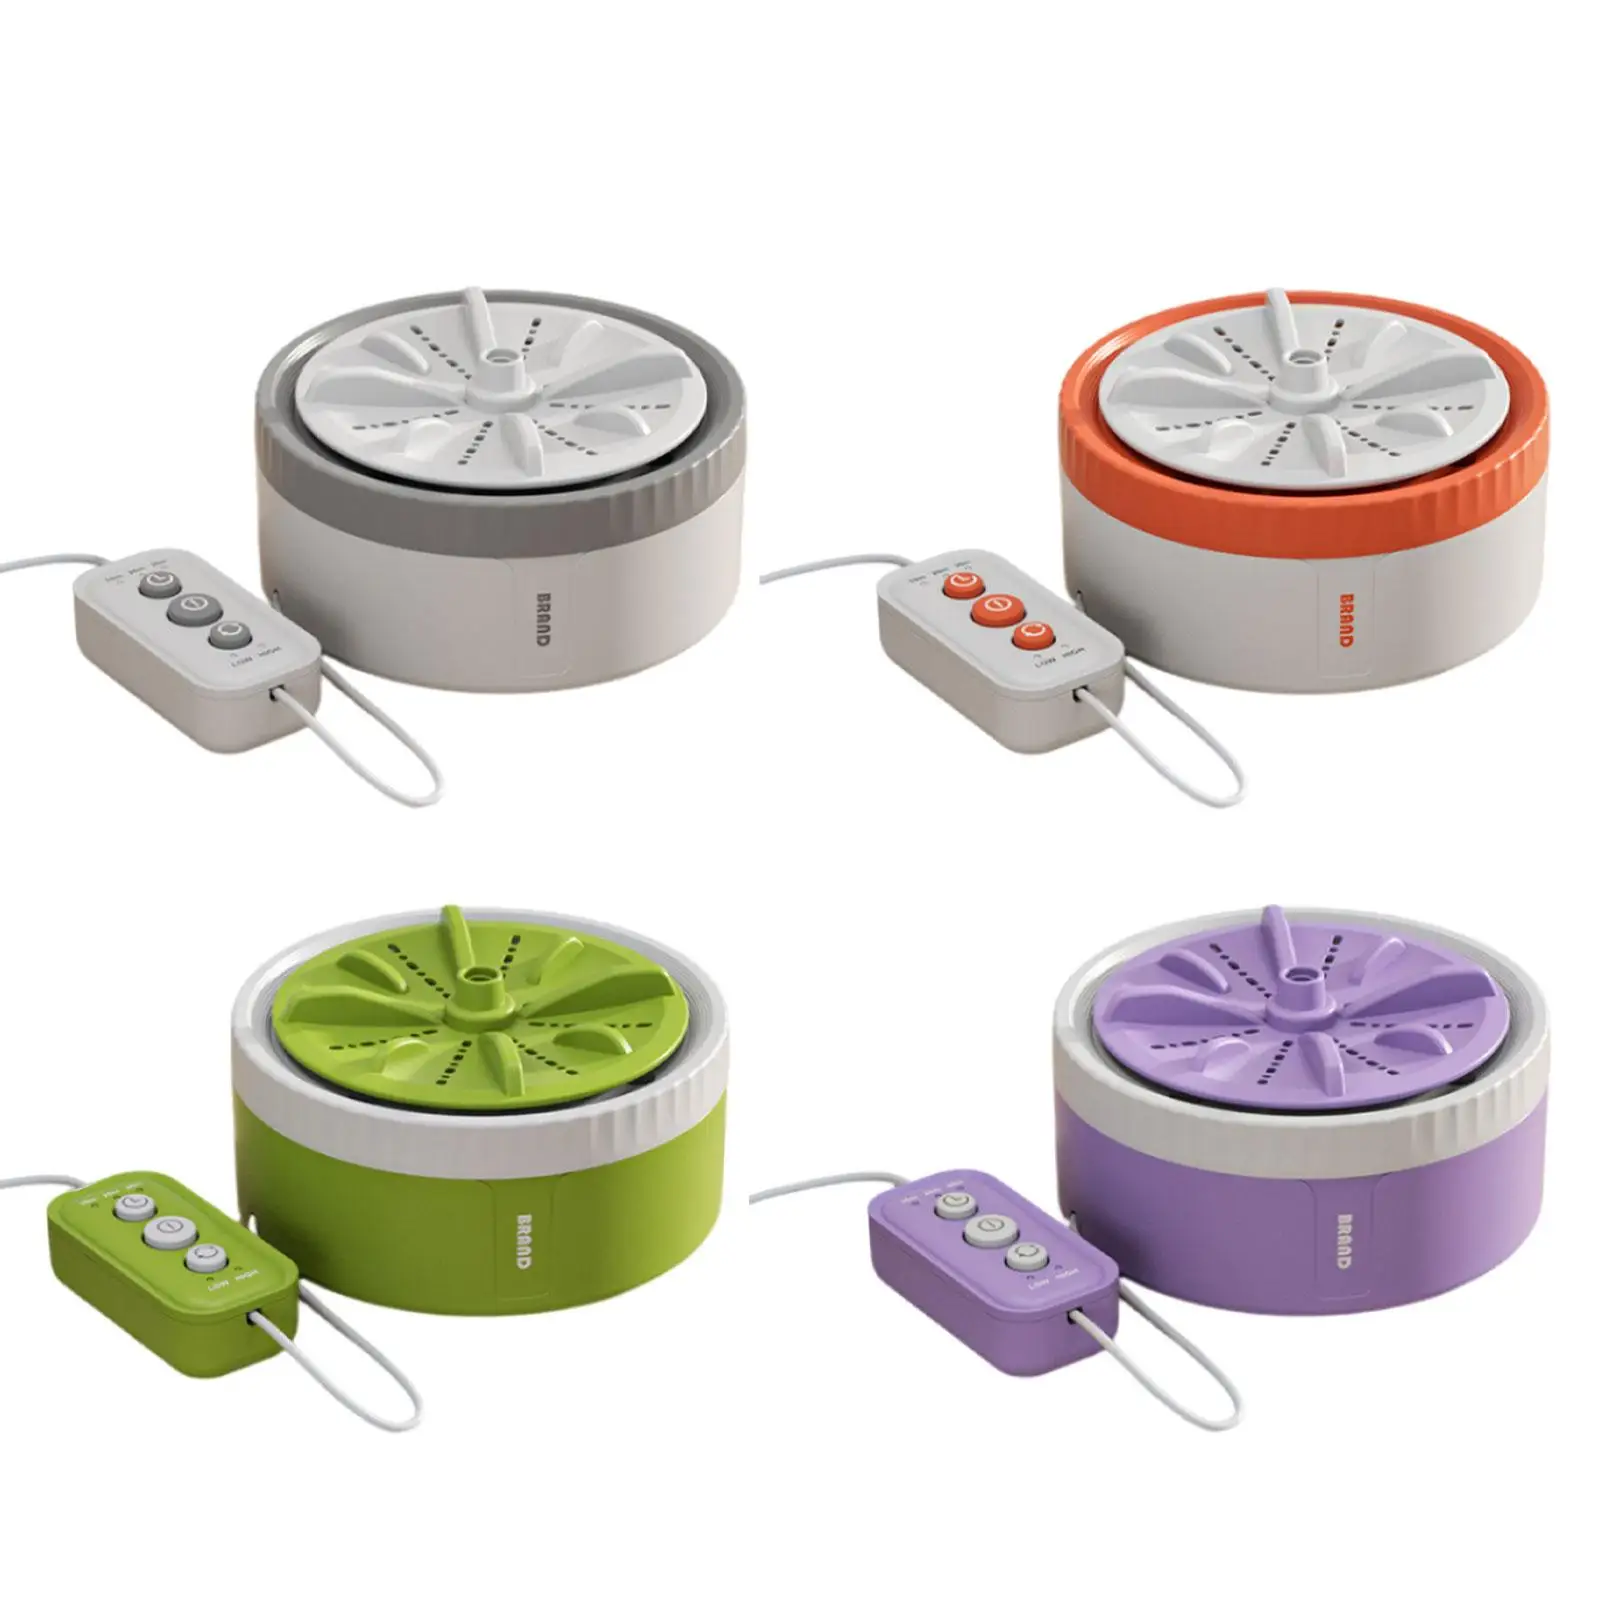 Portable Turbo Washing Machine High Vibration Powered by USB Cable Small... - $7.93